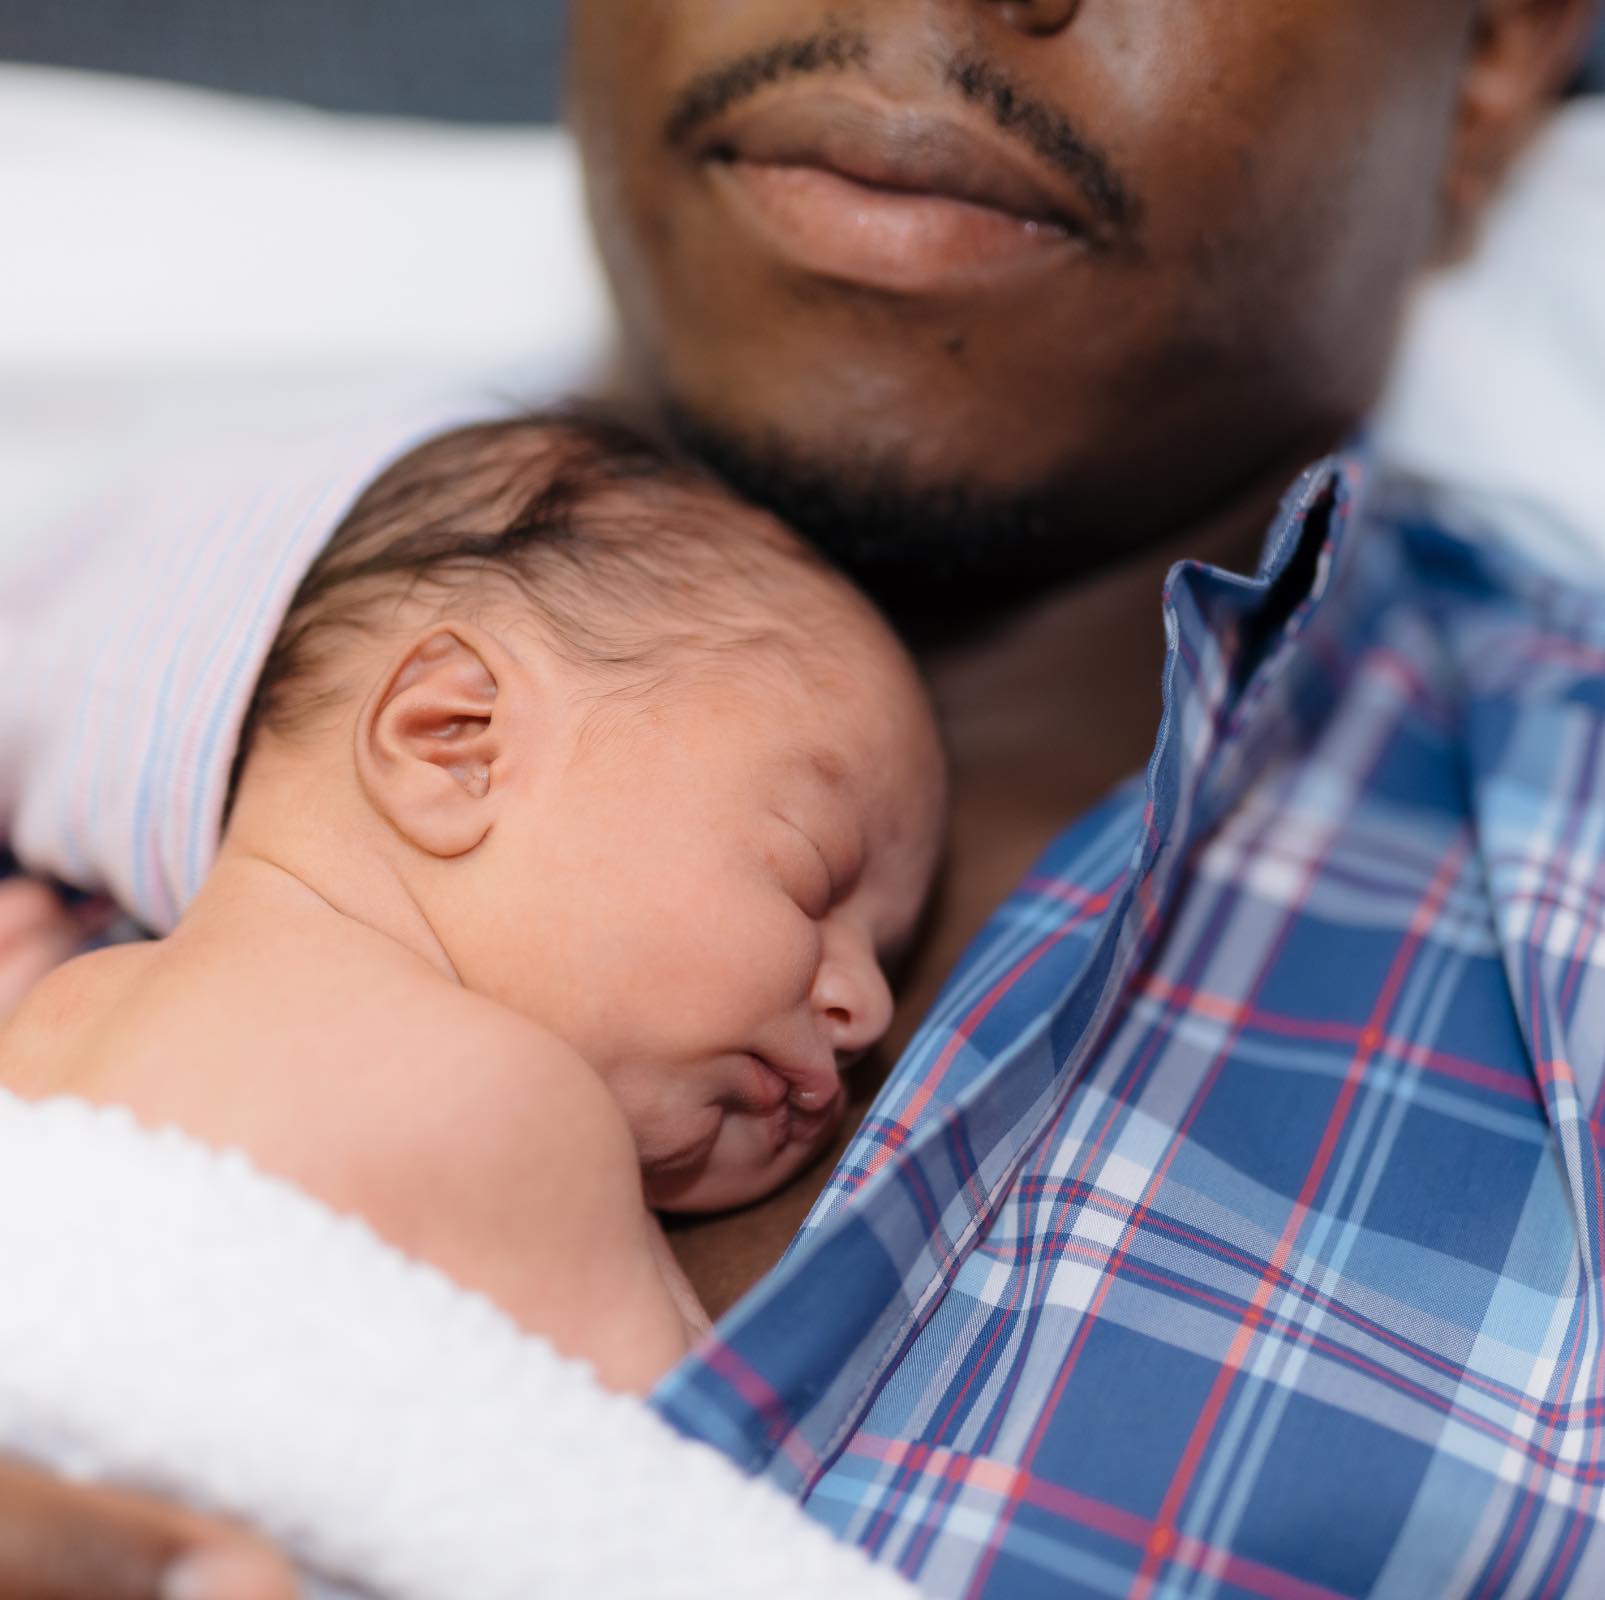 This dad with a newborn baby could appreciate the gift of house cleaning with Zerorez Calgary to ease the transition.